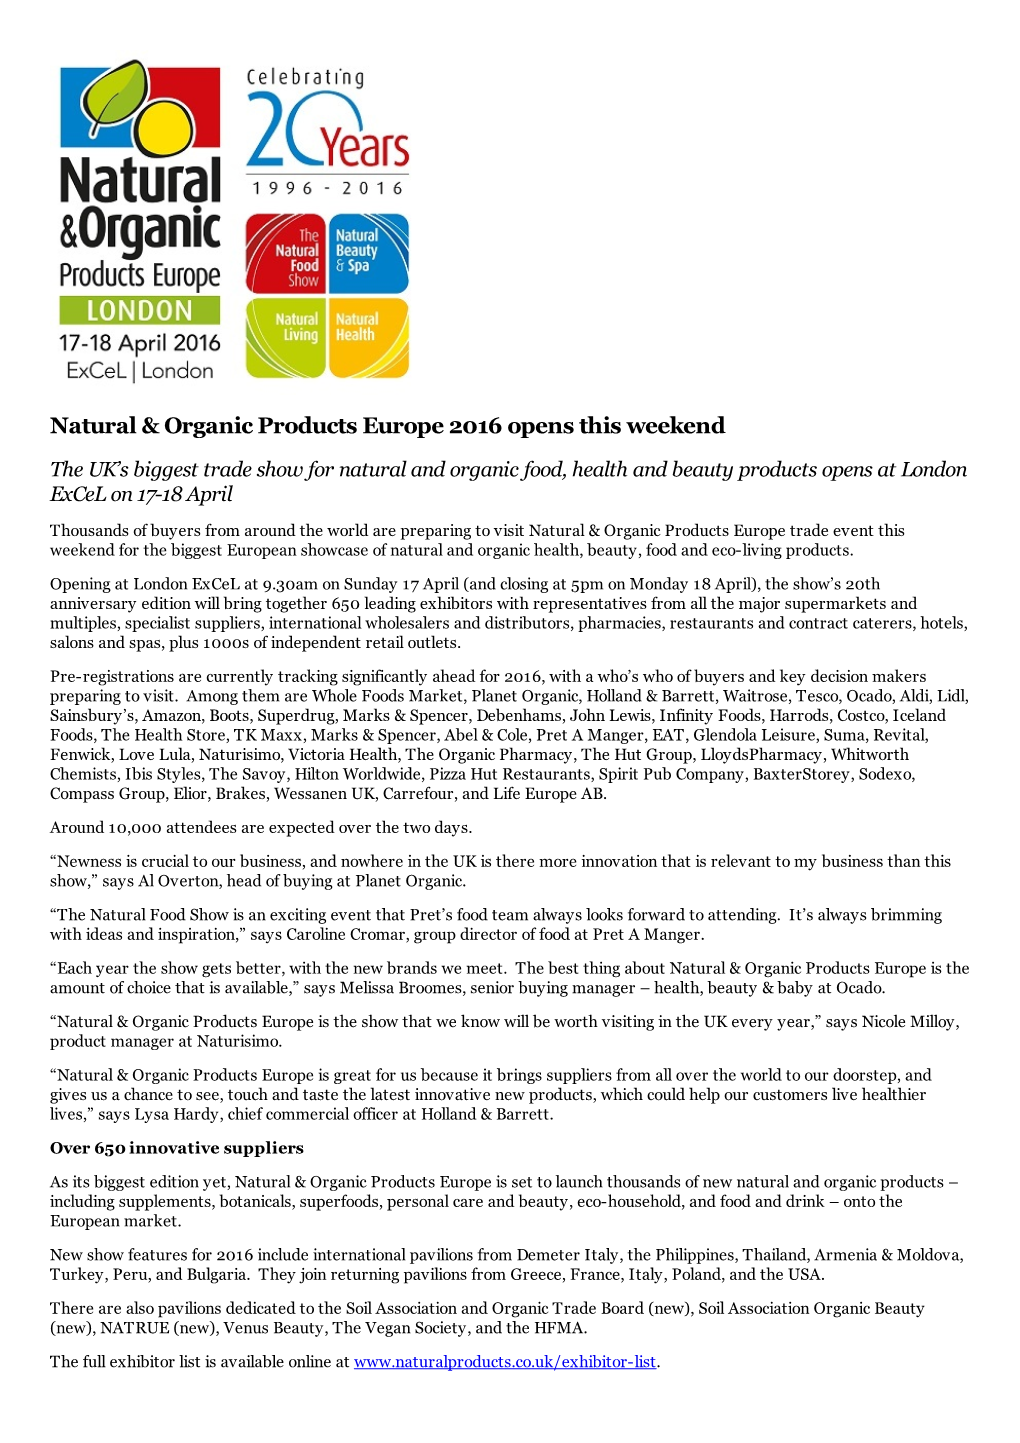 Natural & Organic Products Europe 2016 Opens This Weekend